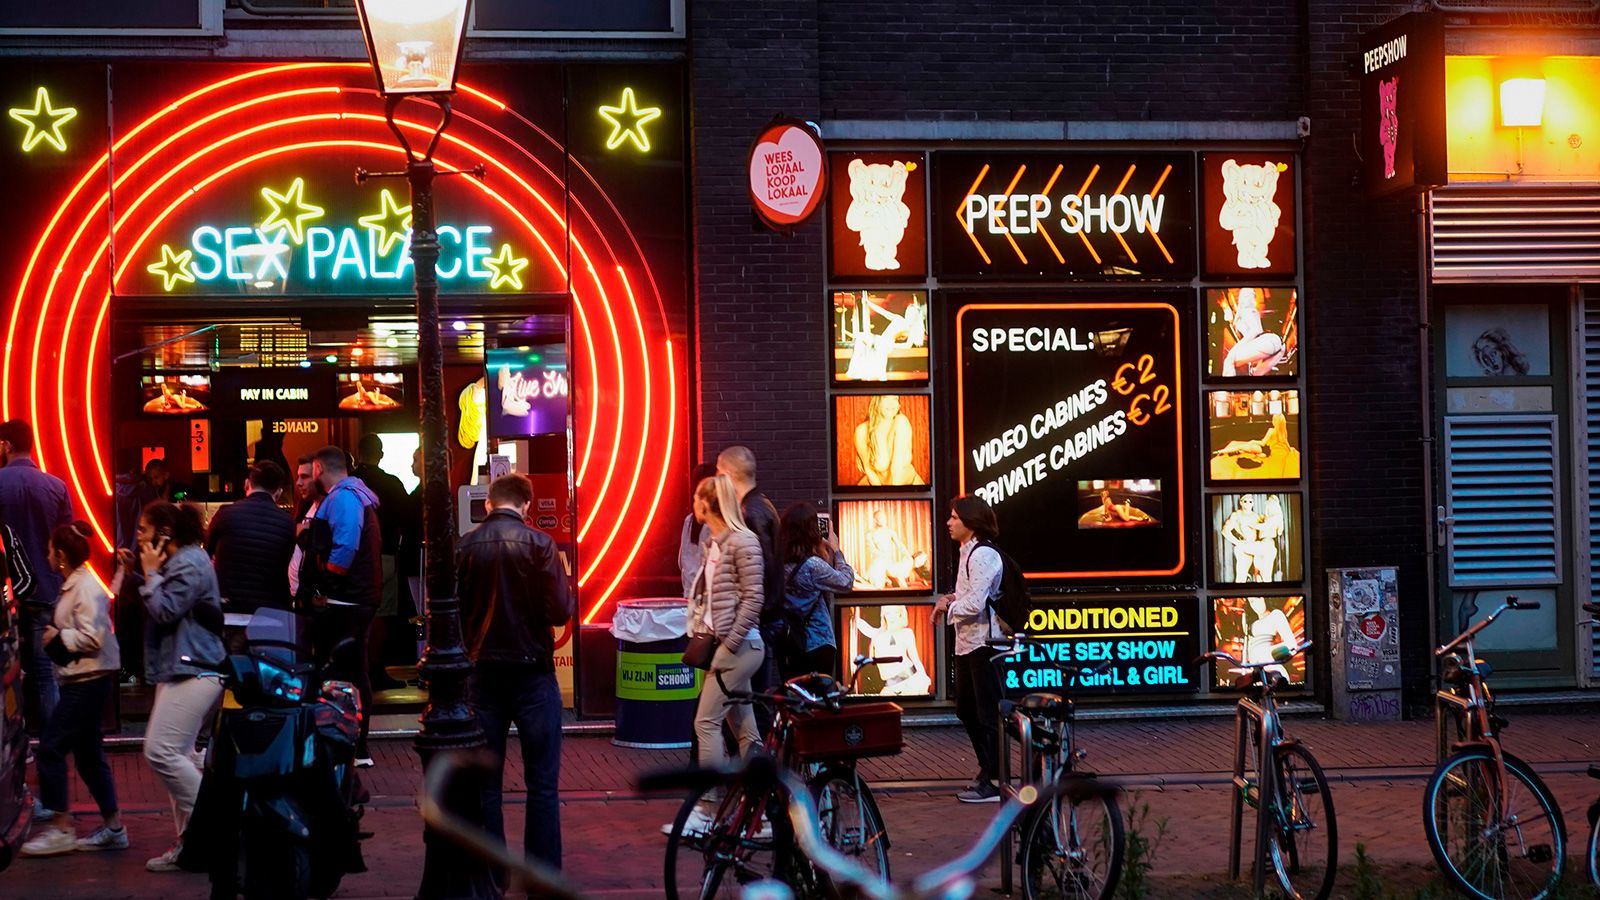 Amsterdam Sex Clubs Group - Sex, drugs and tourism: Amsterdam's 'stay away' campaign targets  troublesome visitors | CNN